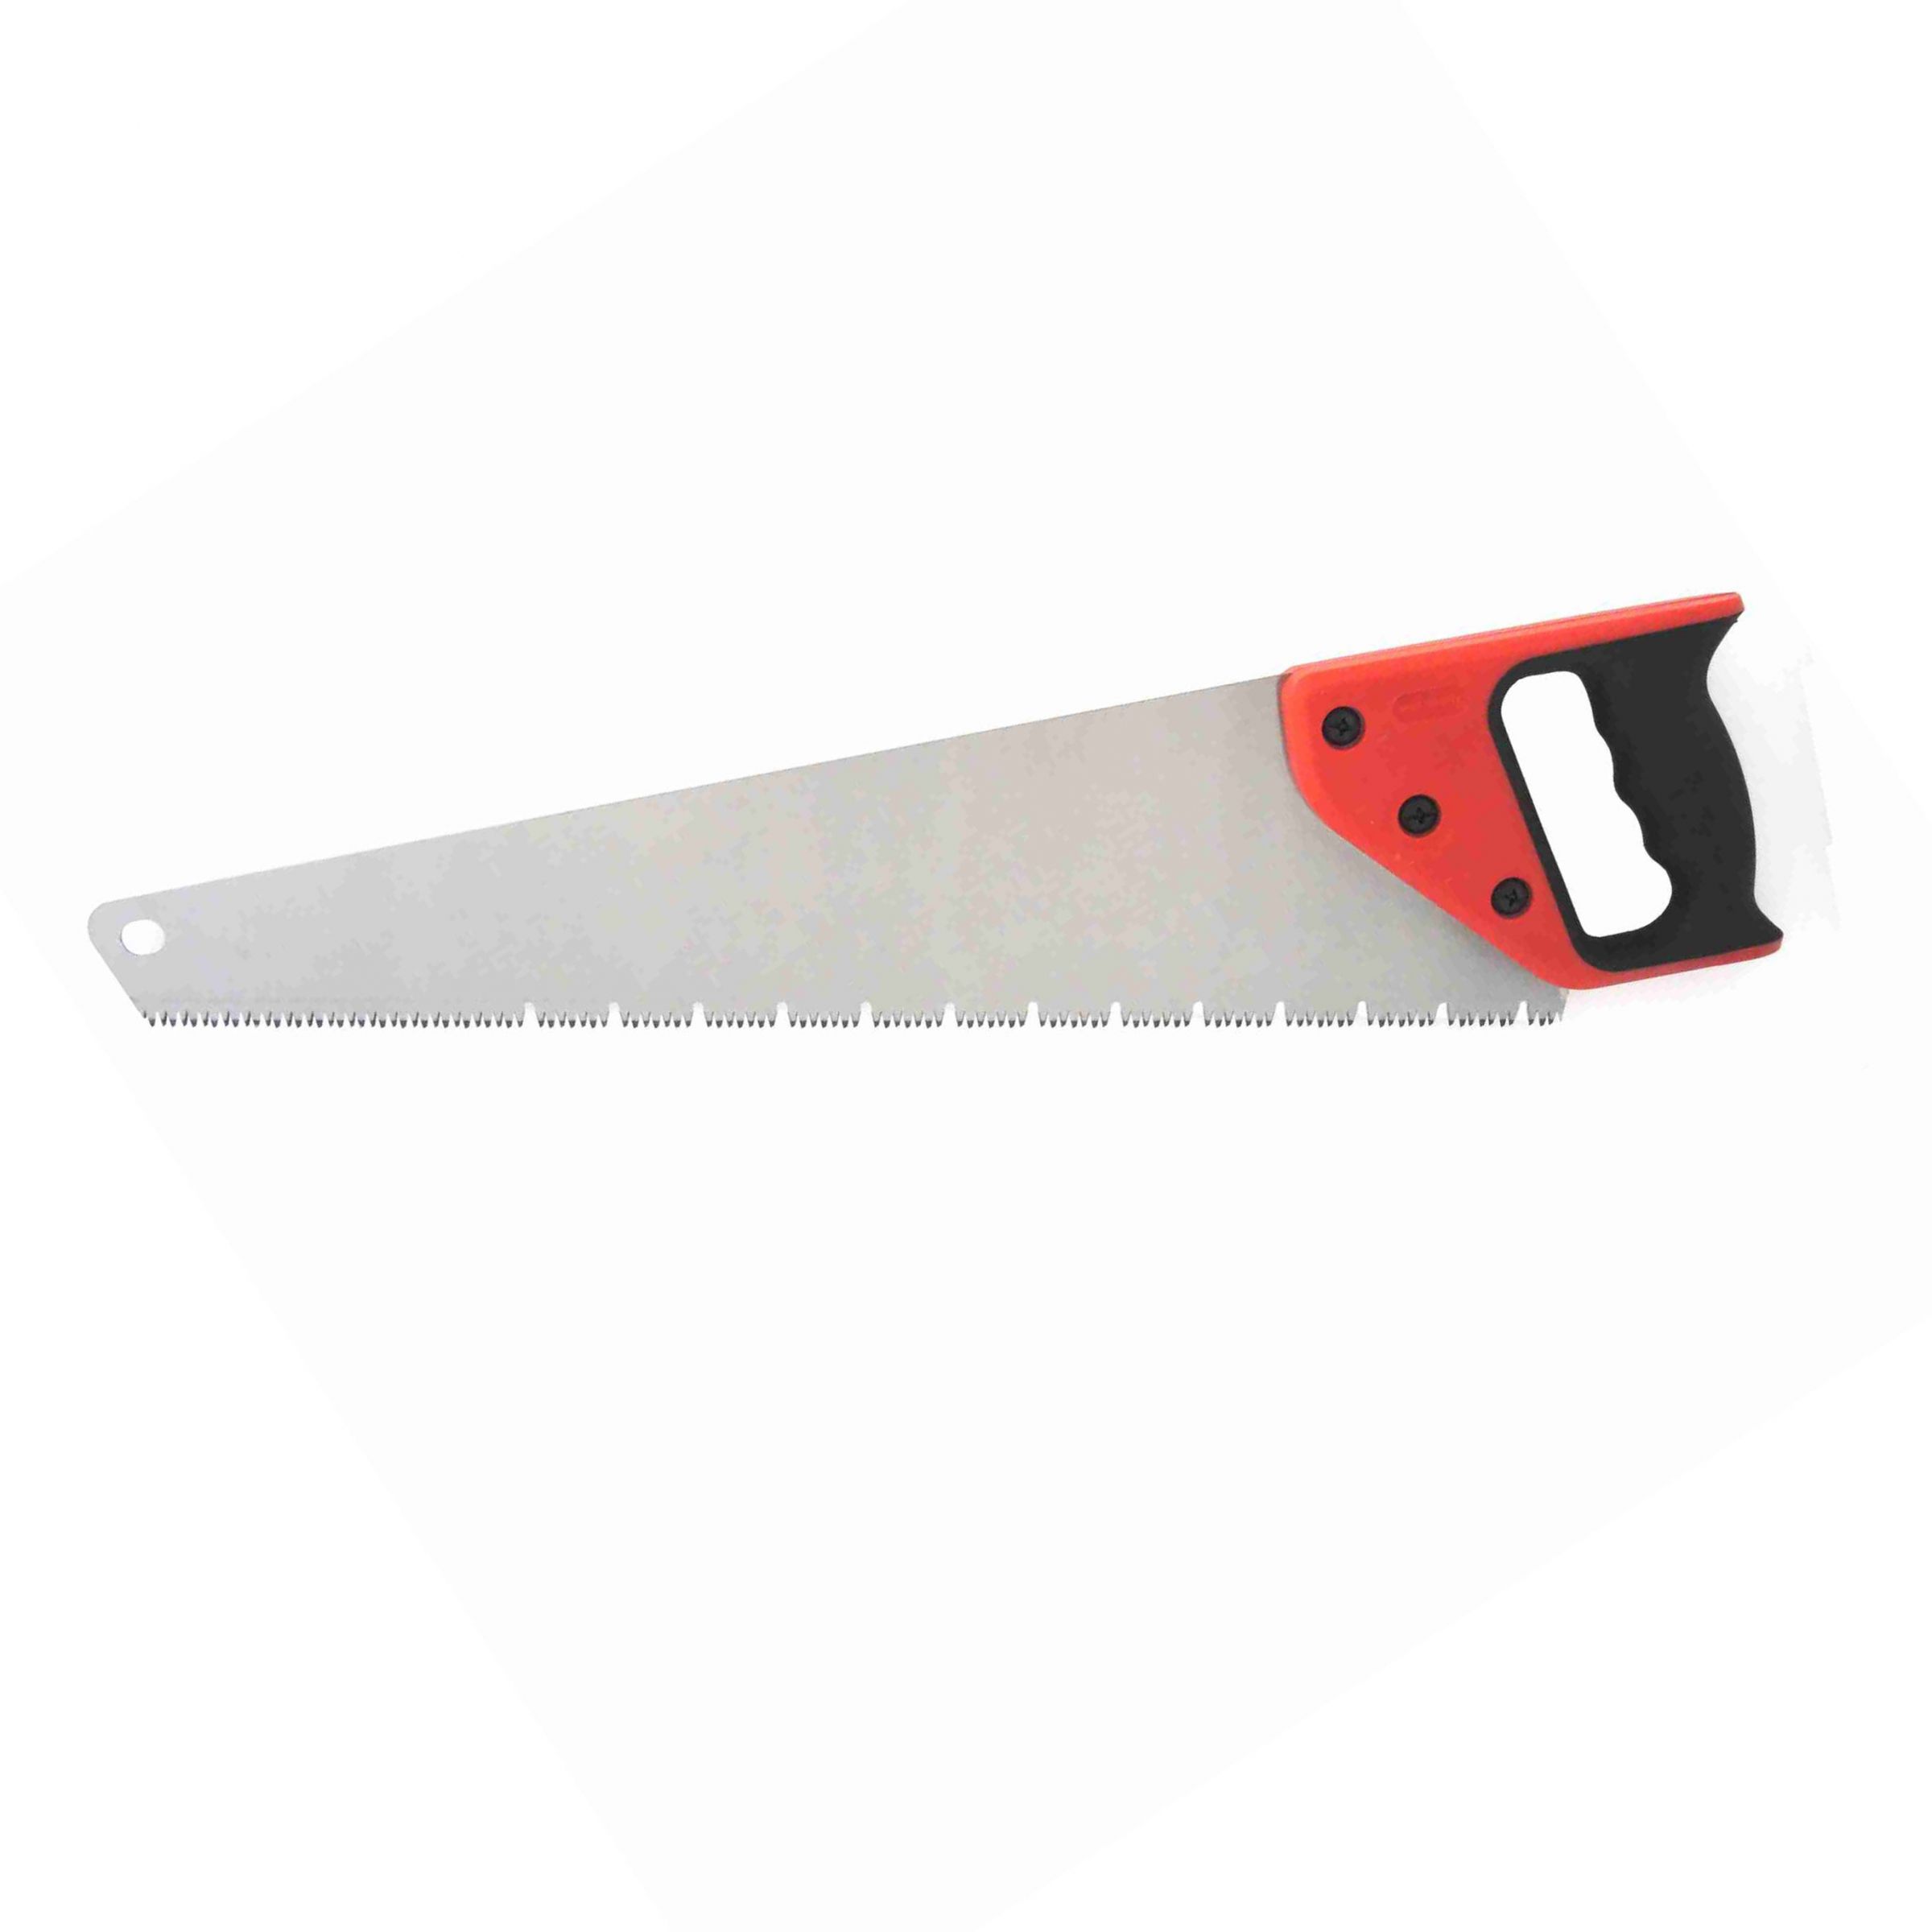 Low Friction Coated Hand Saw, Western Hand Saw | Soteck - A ...